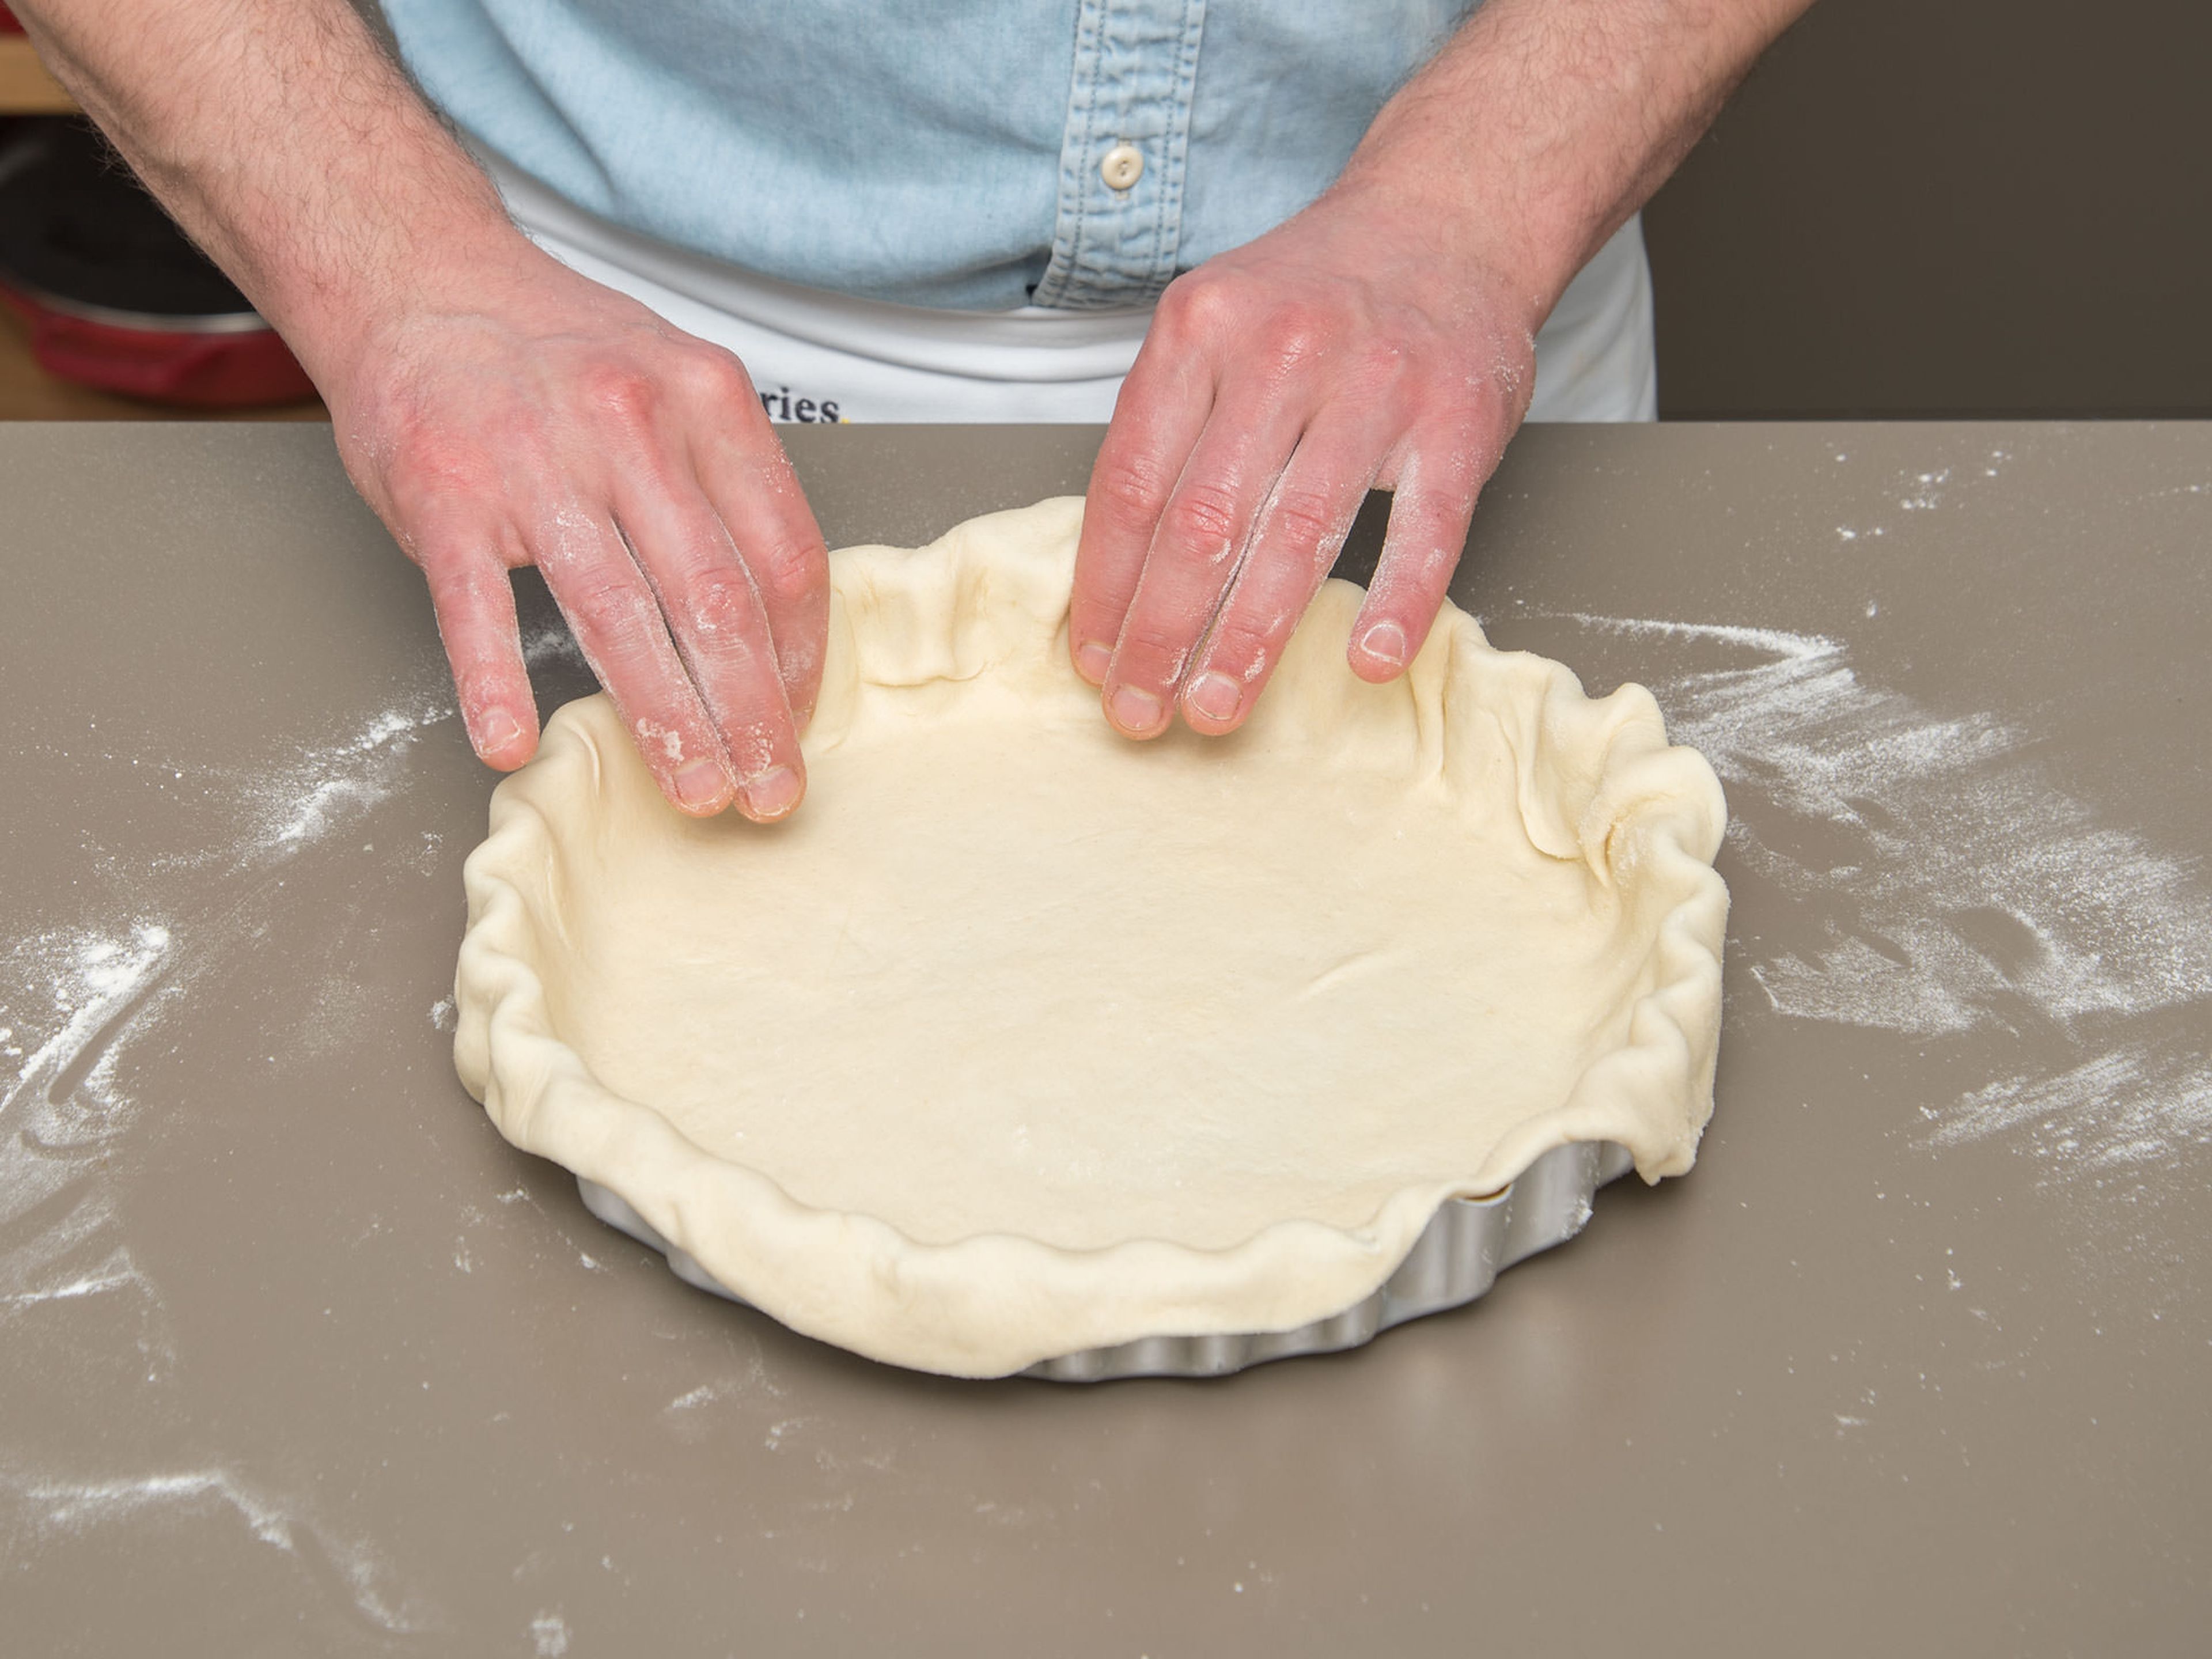 Pre-heat oven to 200°C/390°F. In a bowl, mix sour cream, flour, oil, and milk, and knead everything together until a dough forms. Roll out ¾ of the dough. Fit the dough into the tart pan.